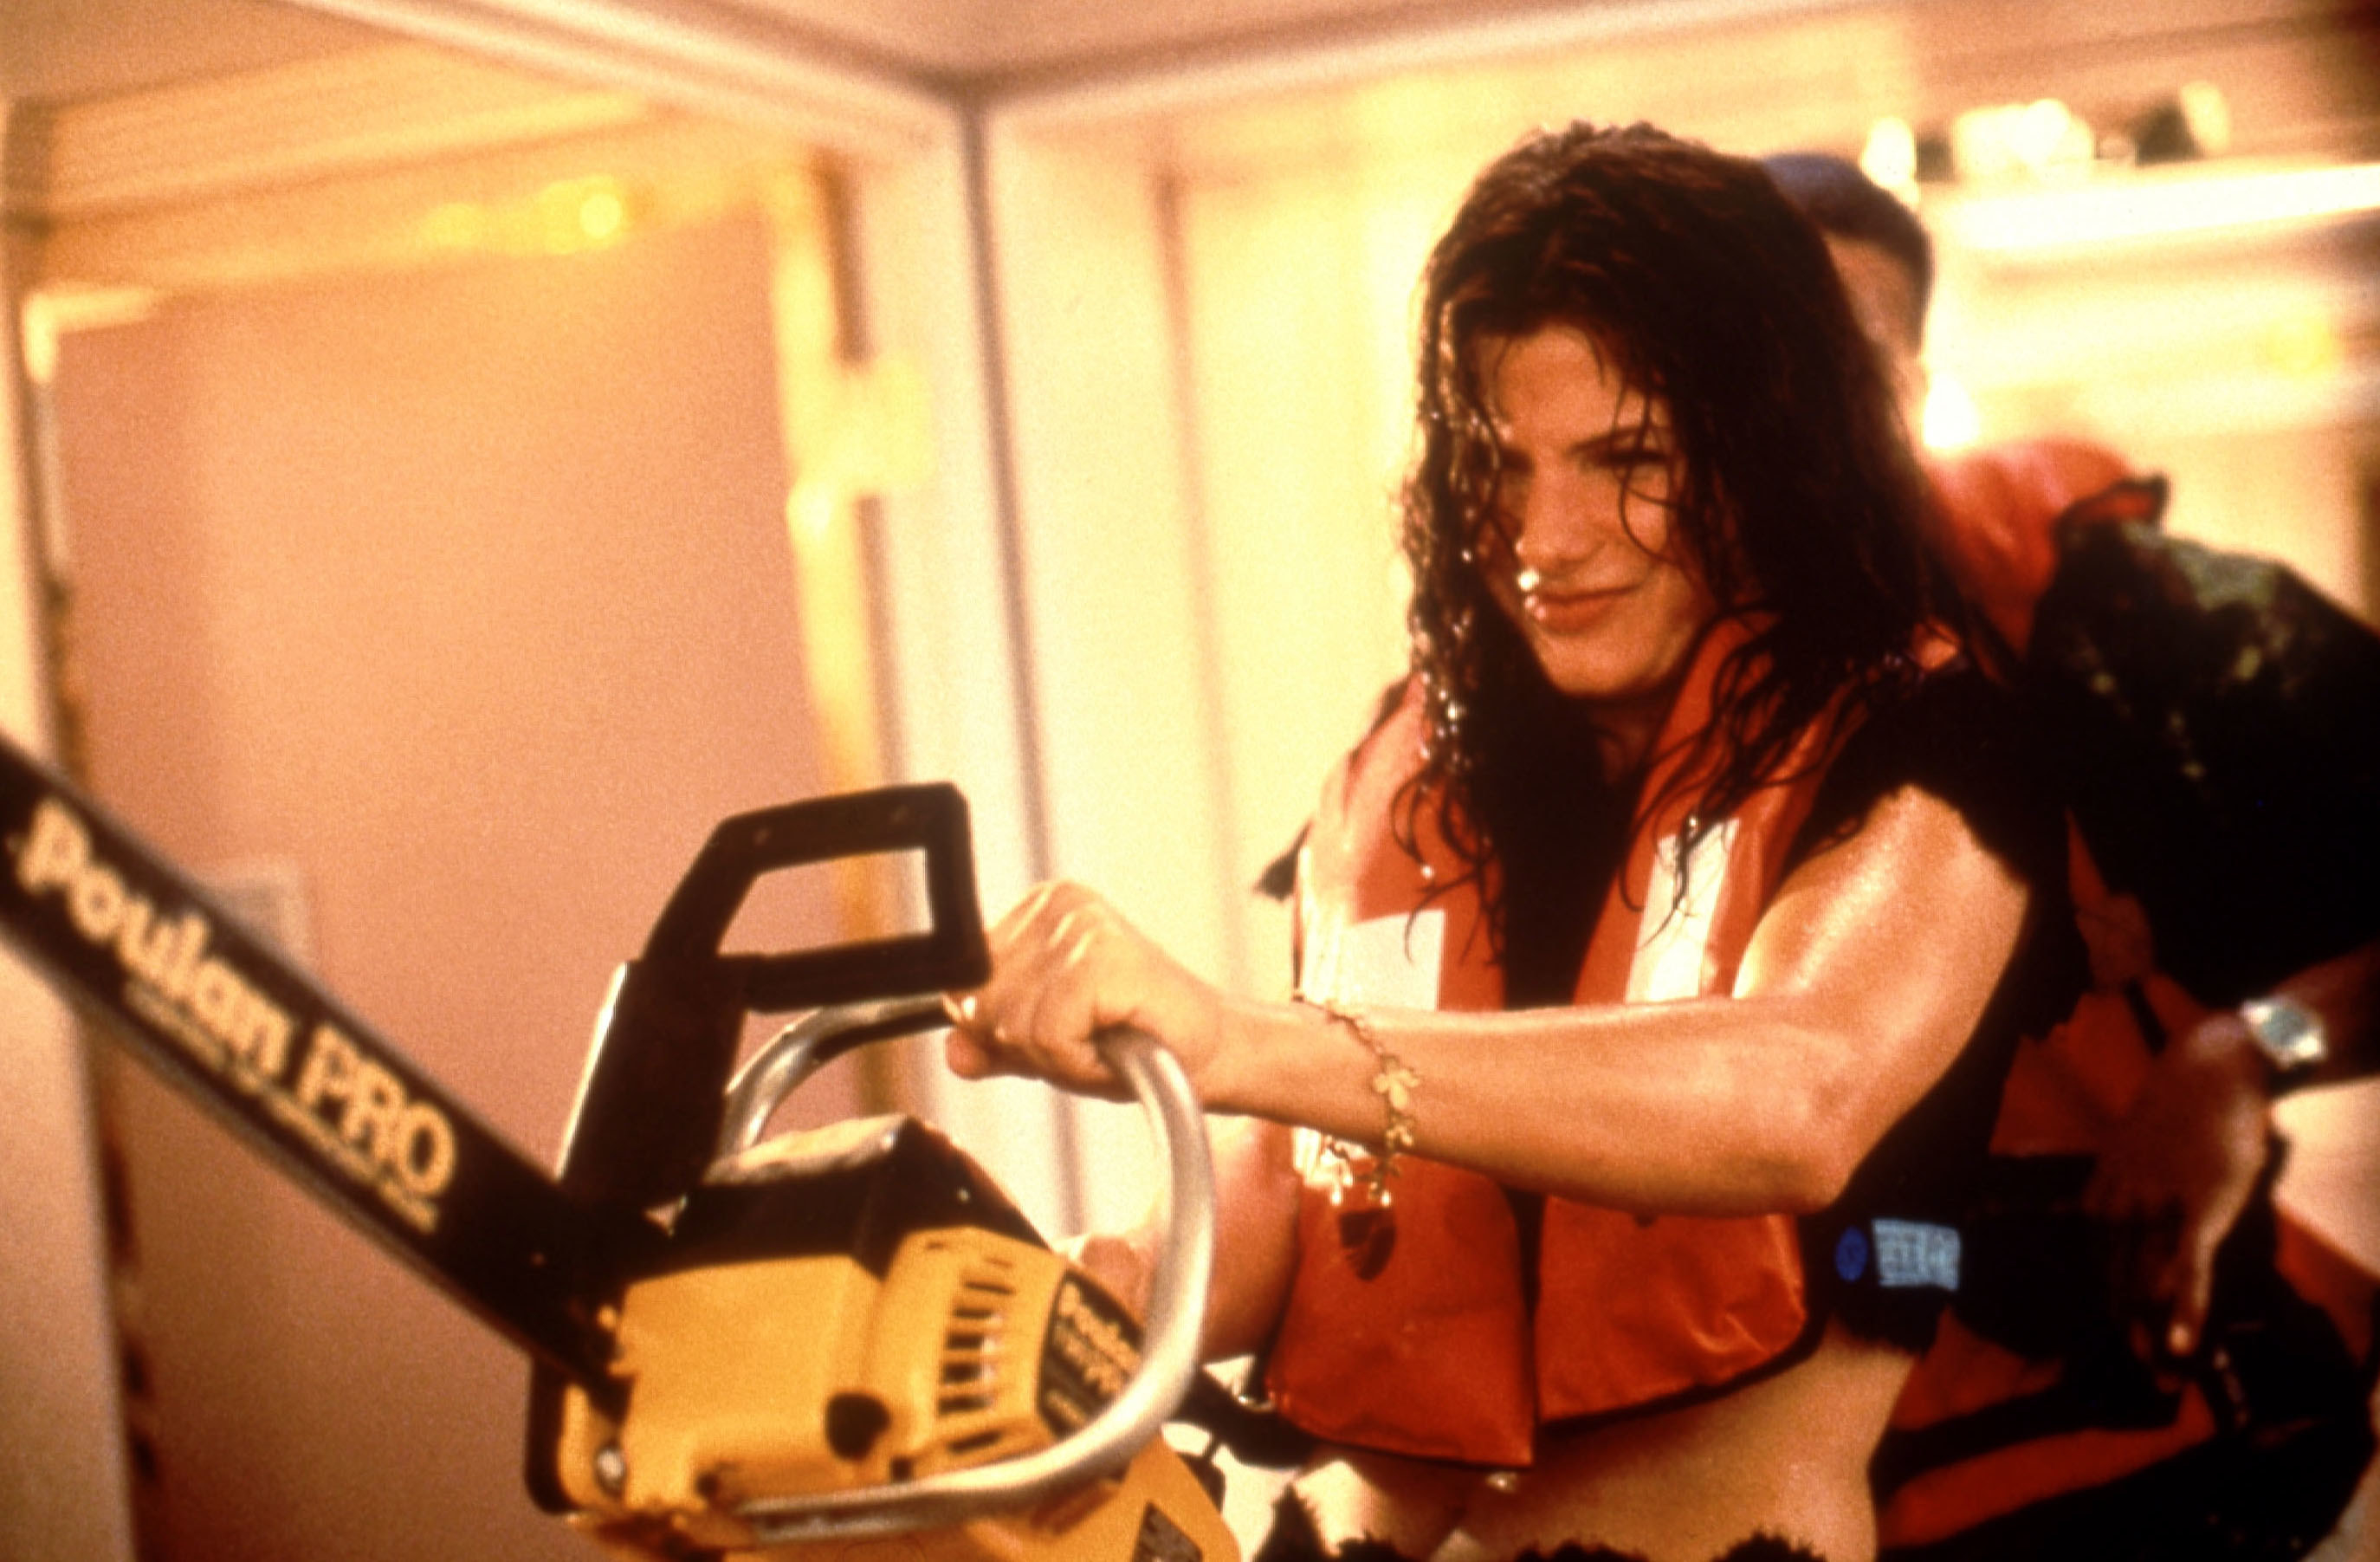 Sandra holding a chainsaw in the movie